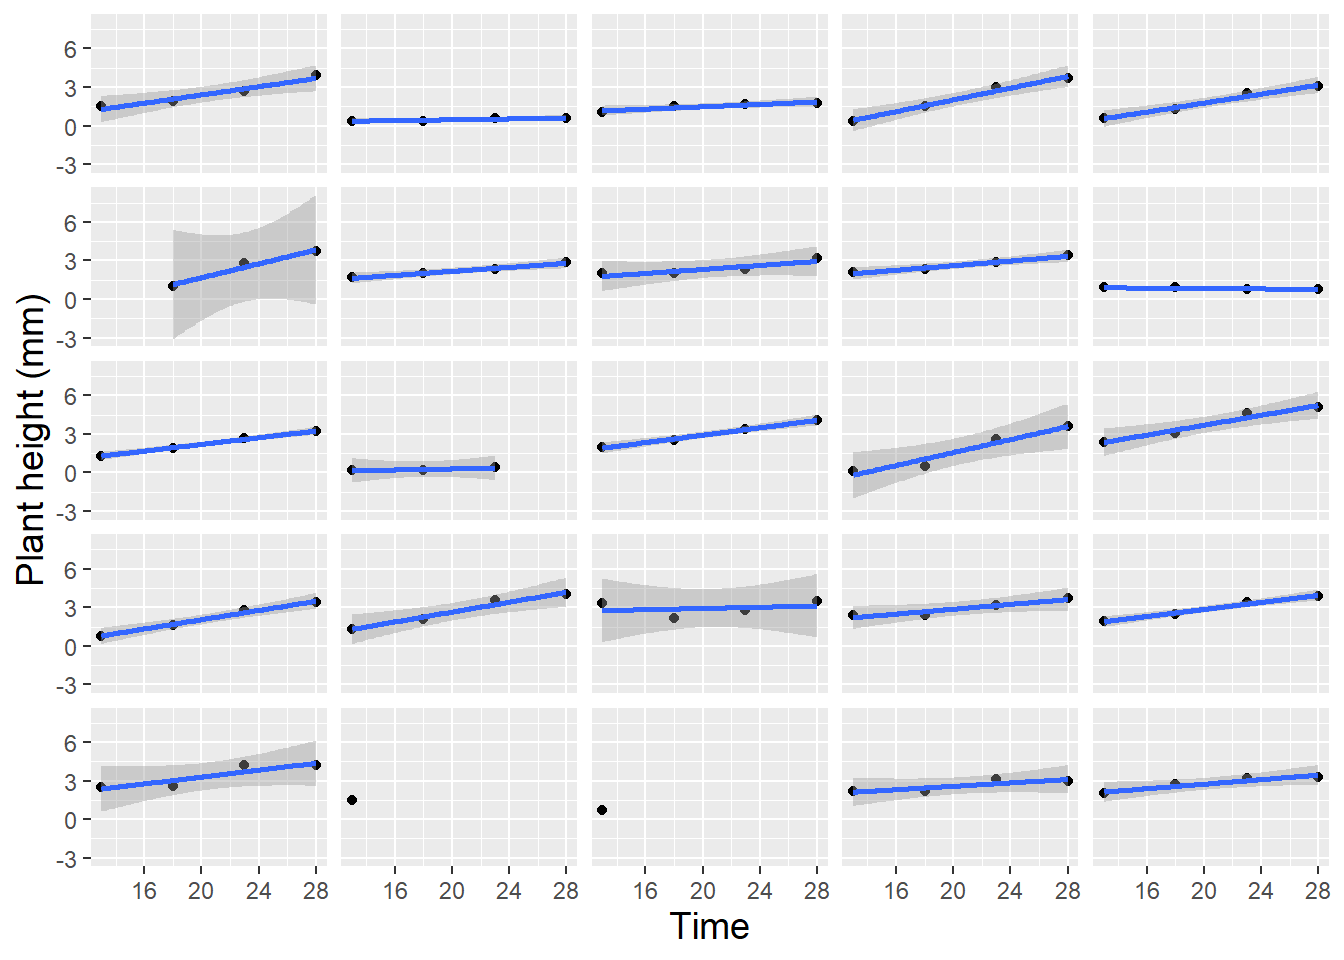  Lattice plot of linear trends fit to 24 randomly selected leadplants.  Two plants with only a single height measurement have no associated regression line.